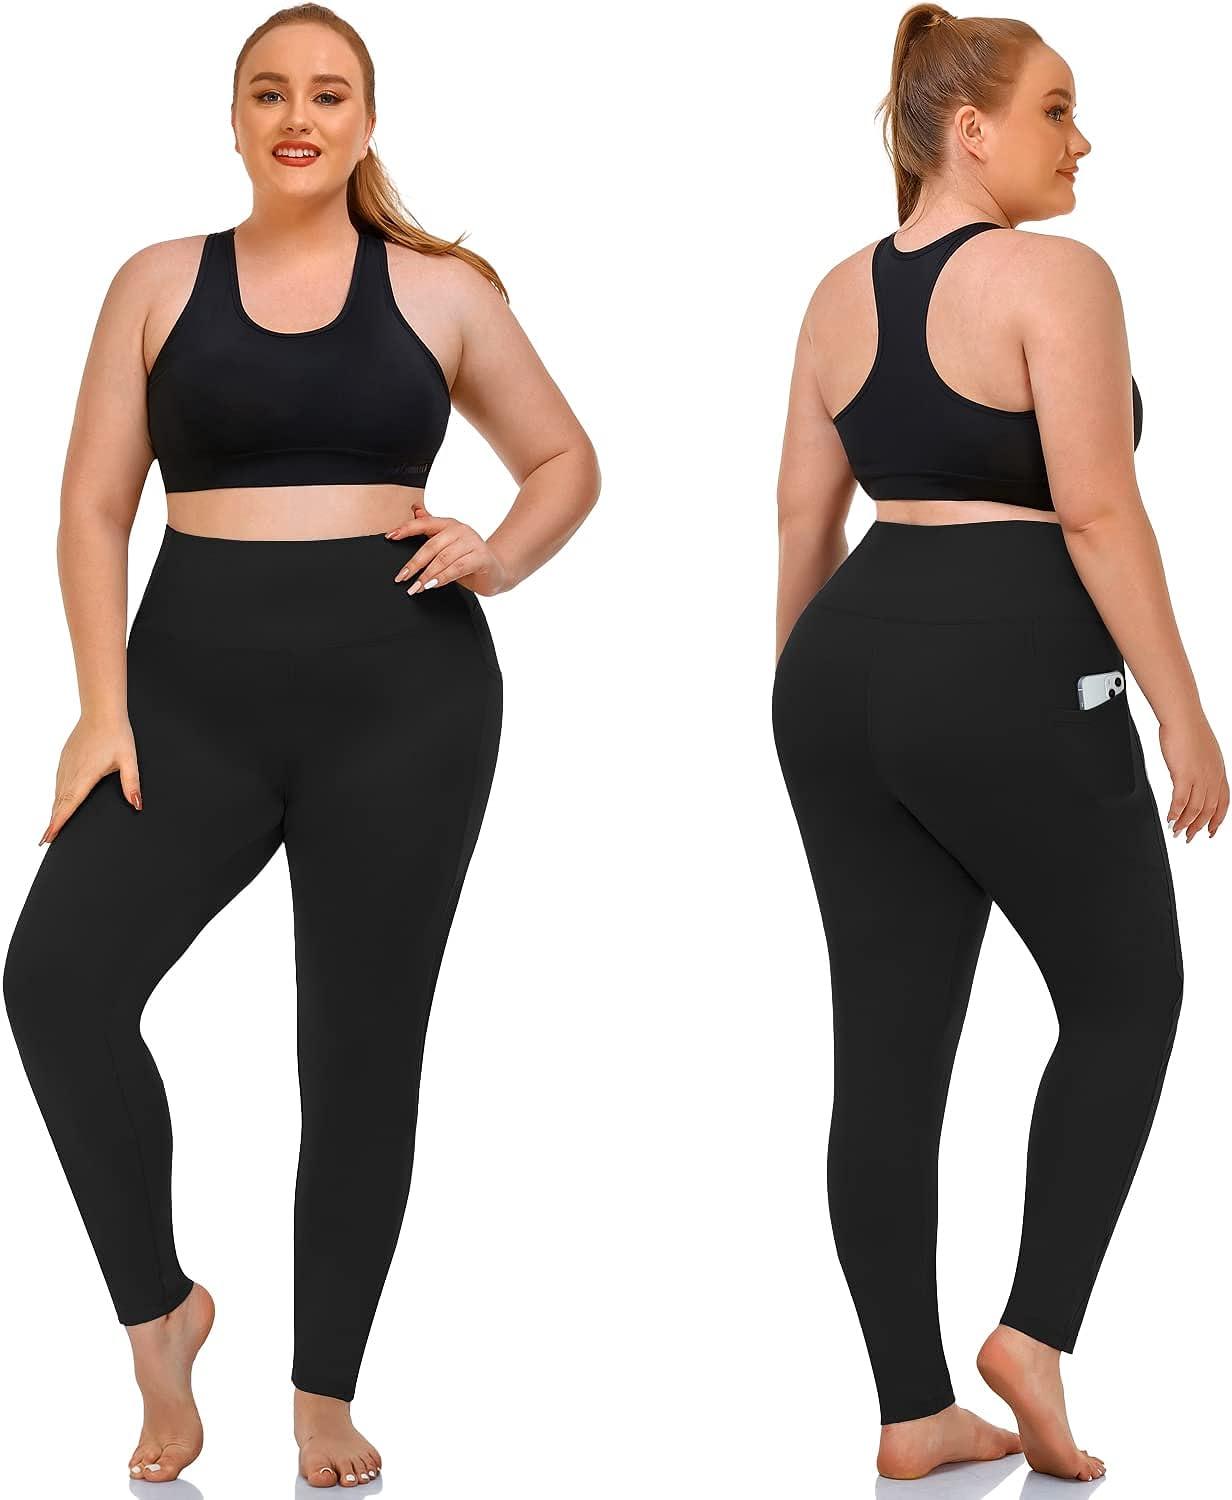 Buy NEW YOUNG Leggings with Pockets for Women,High Waisted Tummy